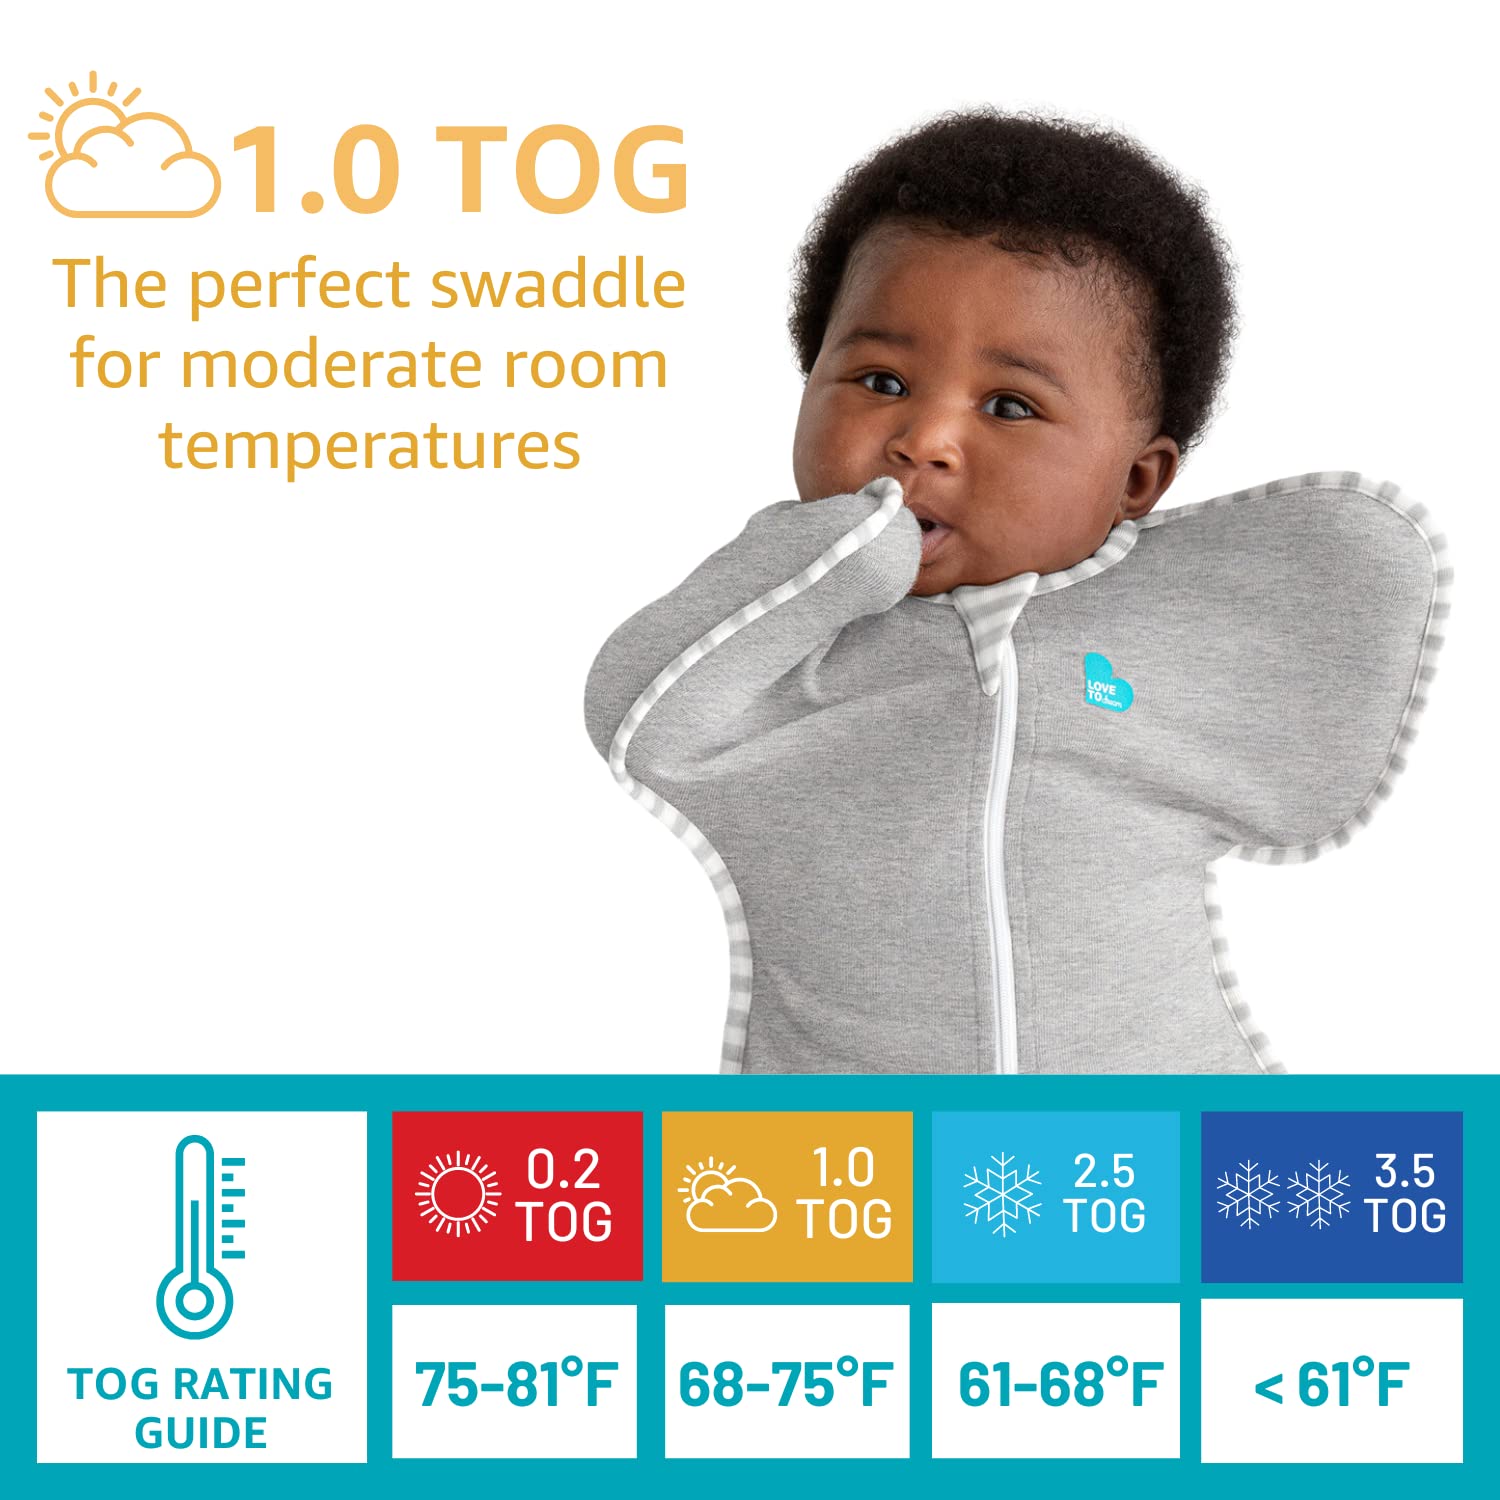 Love to Dream Swaddle UP Self-Soothing Sleep Sack 8-13 lbs, Dramatically Better Sleep, Snug Fit Calms Startle Reflex, 1.0 TOG, Gray, Small